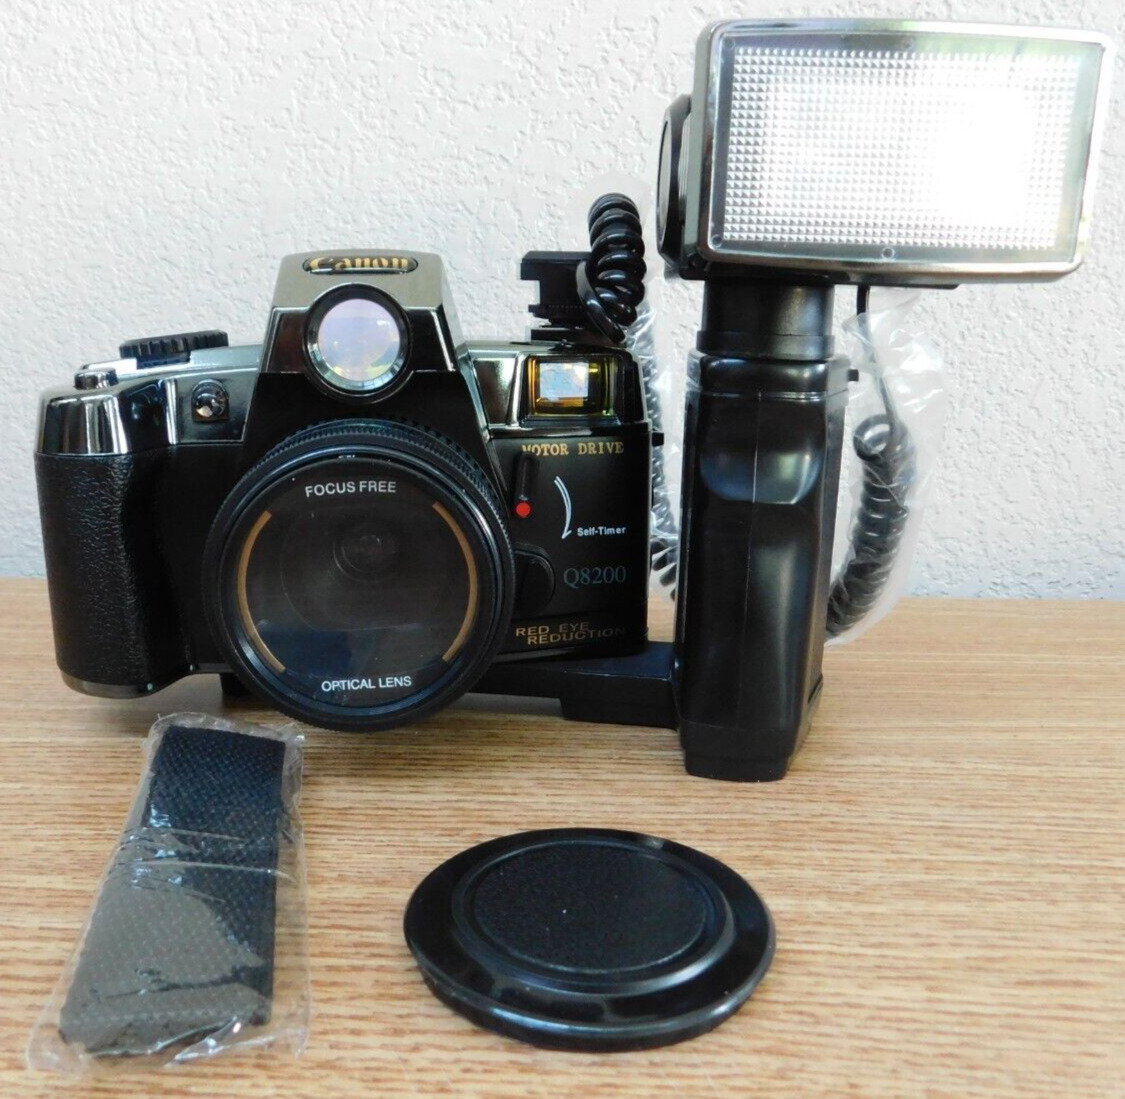 Vintage Canon Q8200 35mm Camera With Bag And Accessories